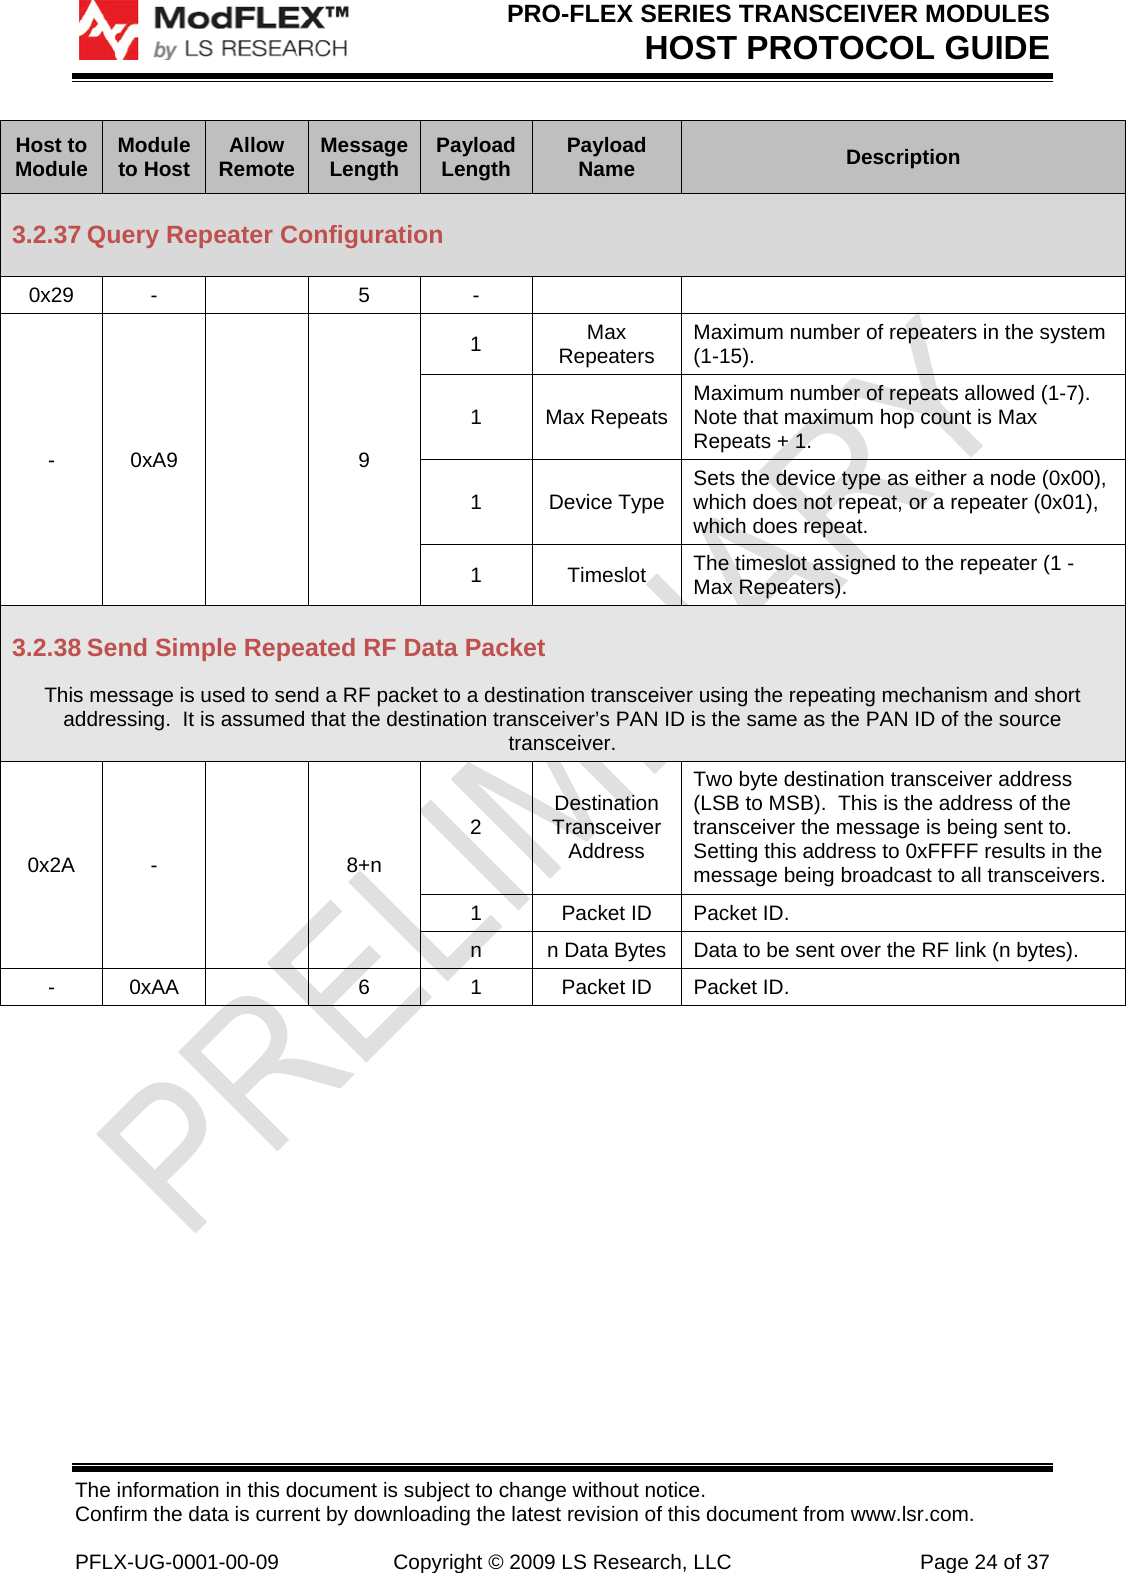 PRO-FLEX SERIES TRANSCEIVER MODULES HOST PROTOCOL GUIDE The information in this document is subject to change without notice. Confirm the data is current by downloading the latest revision of this document from www.lsr.com.  PFLX-UG-0001-00-09  Copyright © 2009 LS Research, LLC  Page 24 of 37 Host to Module  Module to Host  Allow Remote  Message Length  Payload Length  Payload Name  Description 3.2.37 Query Repeater Configuration 0x29 -    5  -     - 0xA9    9 1  Max Repeaters  Maximum number of repeaters in the system (1-15). 1 Max Repeats Maximum number of repeats allowed (1-7).  Note that maximum hop count is Max Repeats + 1. 1 Device Type Sets the device type as either a node (0x00), which does not repeat, or a repeater (0x01), which does repeat. 1 Timeslot The timeslot assigned to the repeater (1 - Max Repeaters). 3.2.38 Send Simple Repeated RF Data Packet This message is used to send a RF packet to a destination transceiver using the repeating mechanism and short addressing.  It is assumed that the destination transceiver’s PAN ID is the same as the PAN ID of the source transceiver. 0x2A -    8+n 2  Destination Transceiver Address Two byte destination transceiver address (LSB to MSB).  This is the address of the transceiver the message is being sent to.  Setting this address to 0xFFFF results in the message being broadcast to all transceivers. 1  Packet ID  Packet ID. n  n Data Bytes  Data to be sent over the RF link (n bytes). -  0xAA    6  1  Packet ID  Packet ID. 